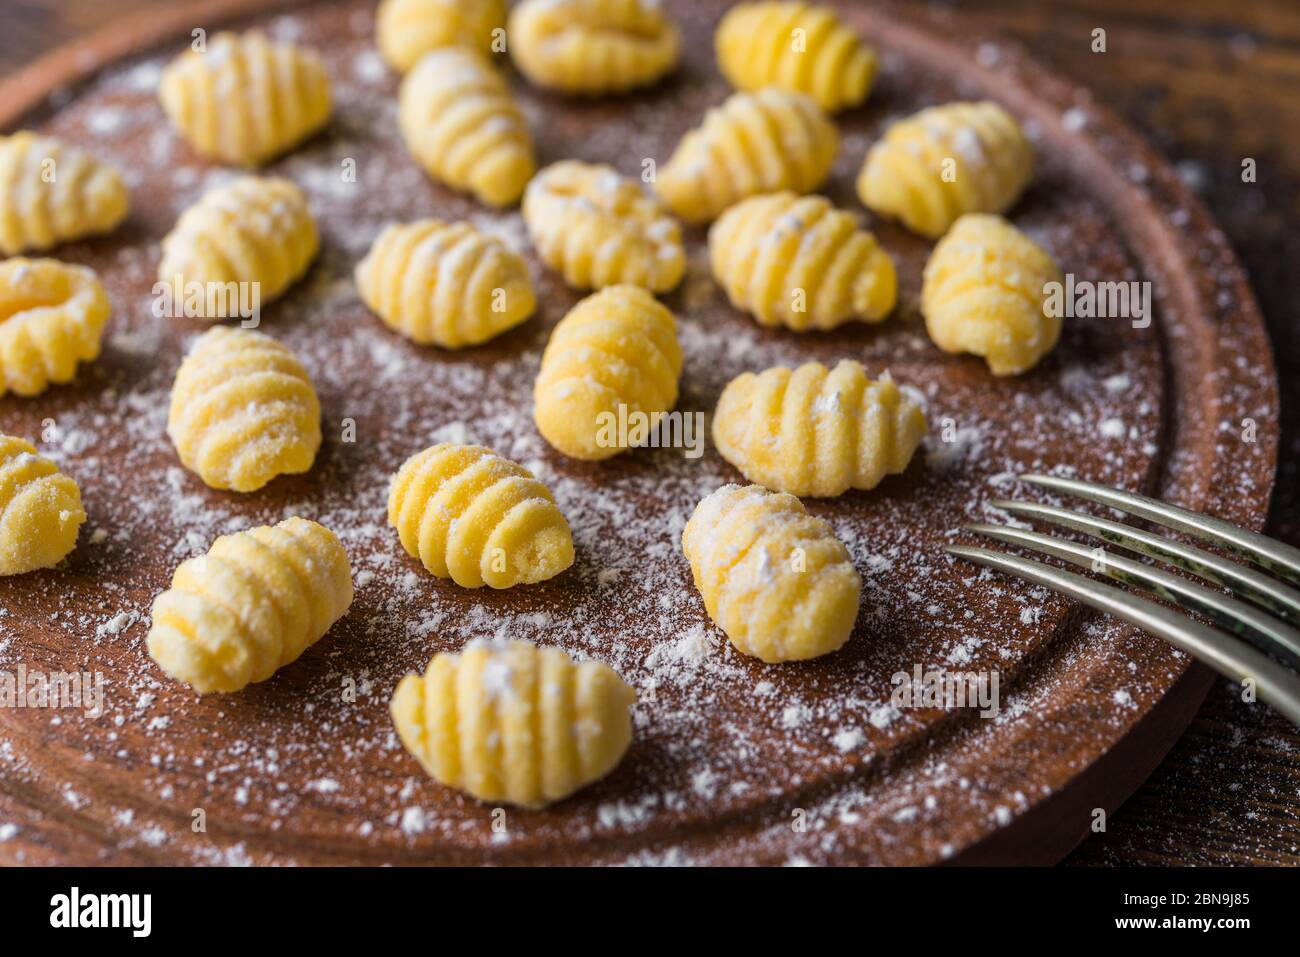 Making gnocchi, traditional Italian pasta food made of potatoes and flour. Stock Photo